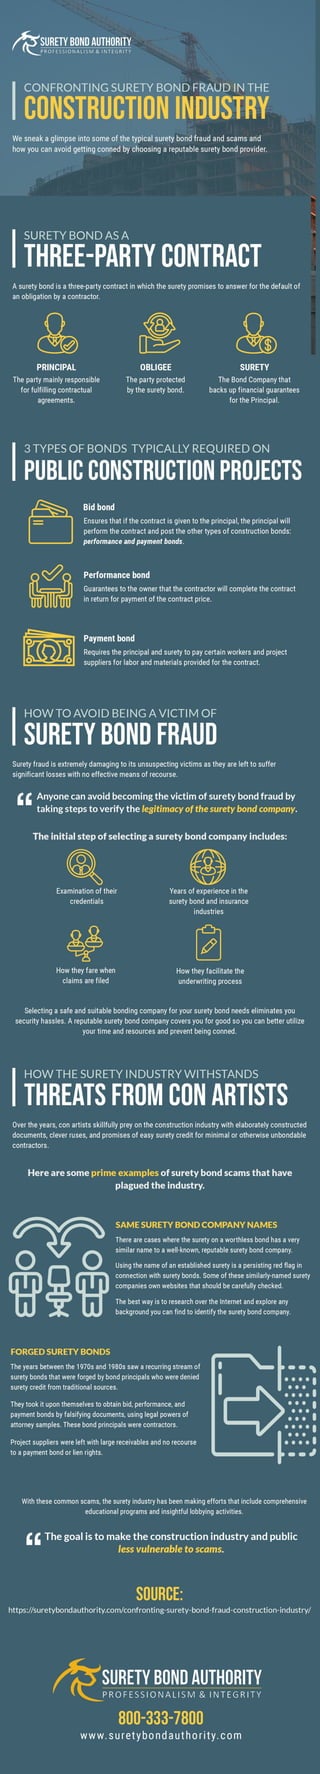 Confronting Surety Bond Fraud in the Construction Industry